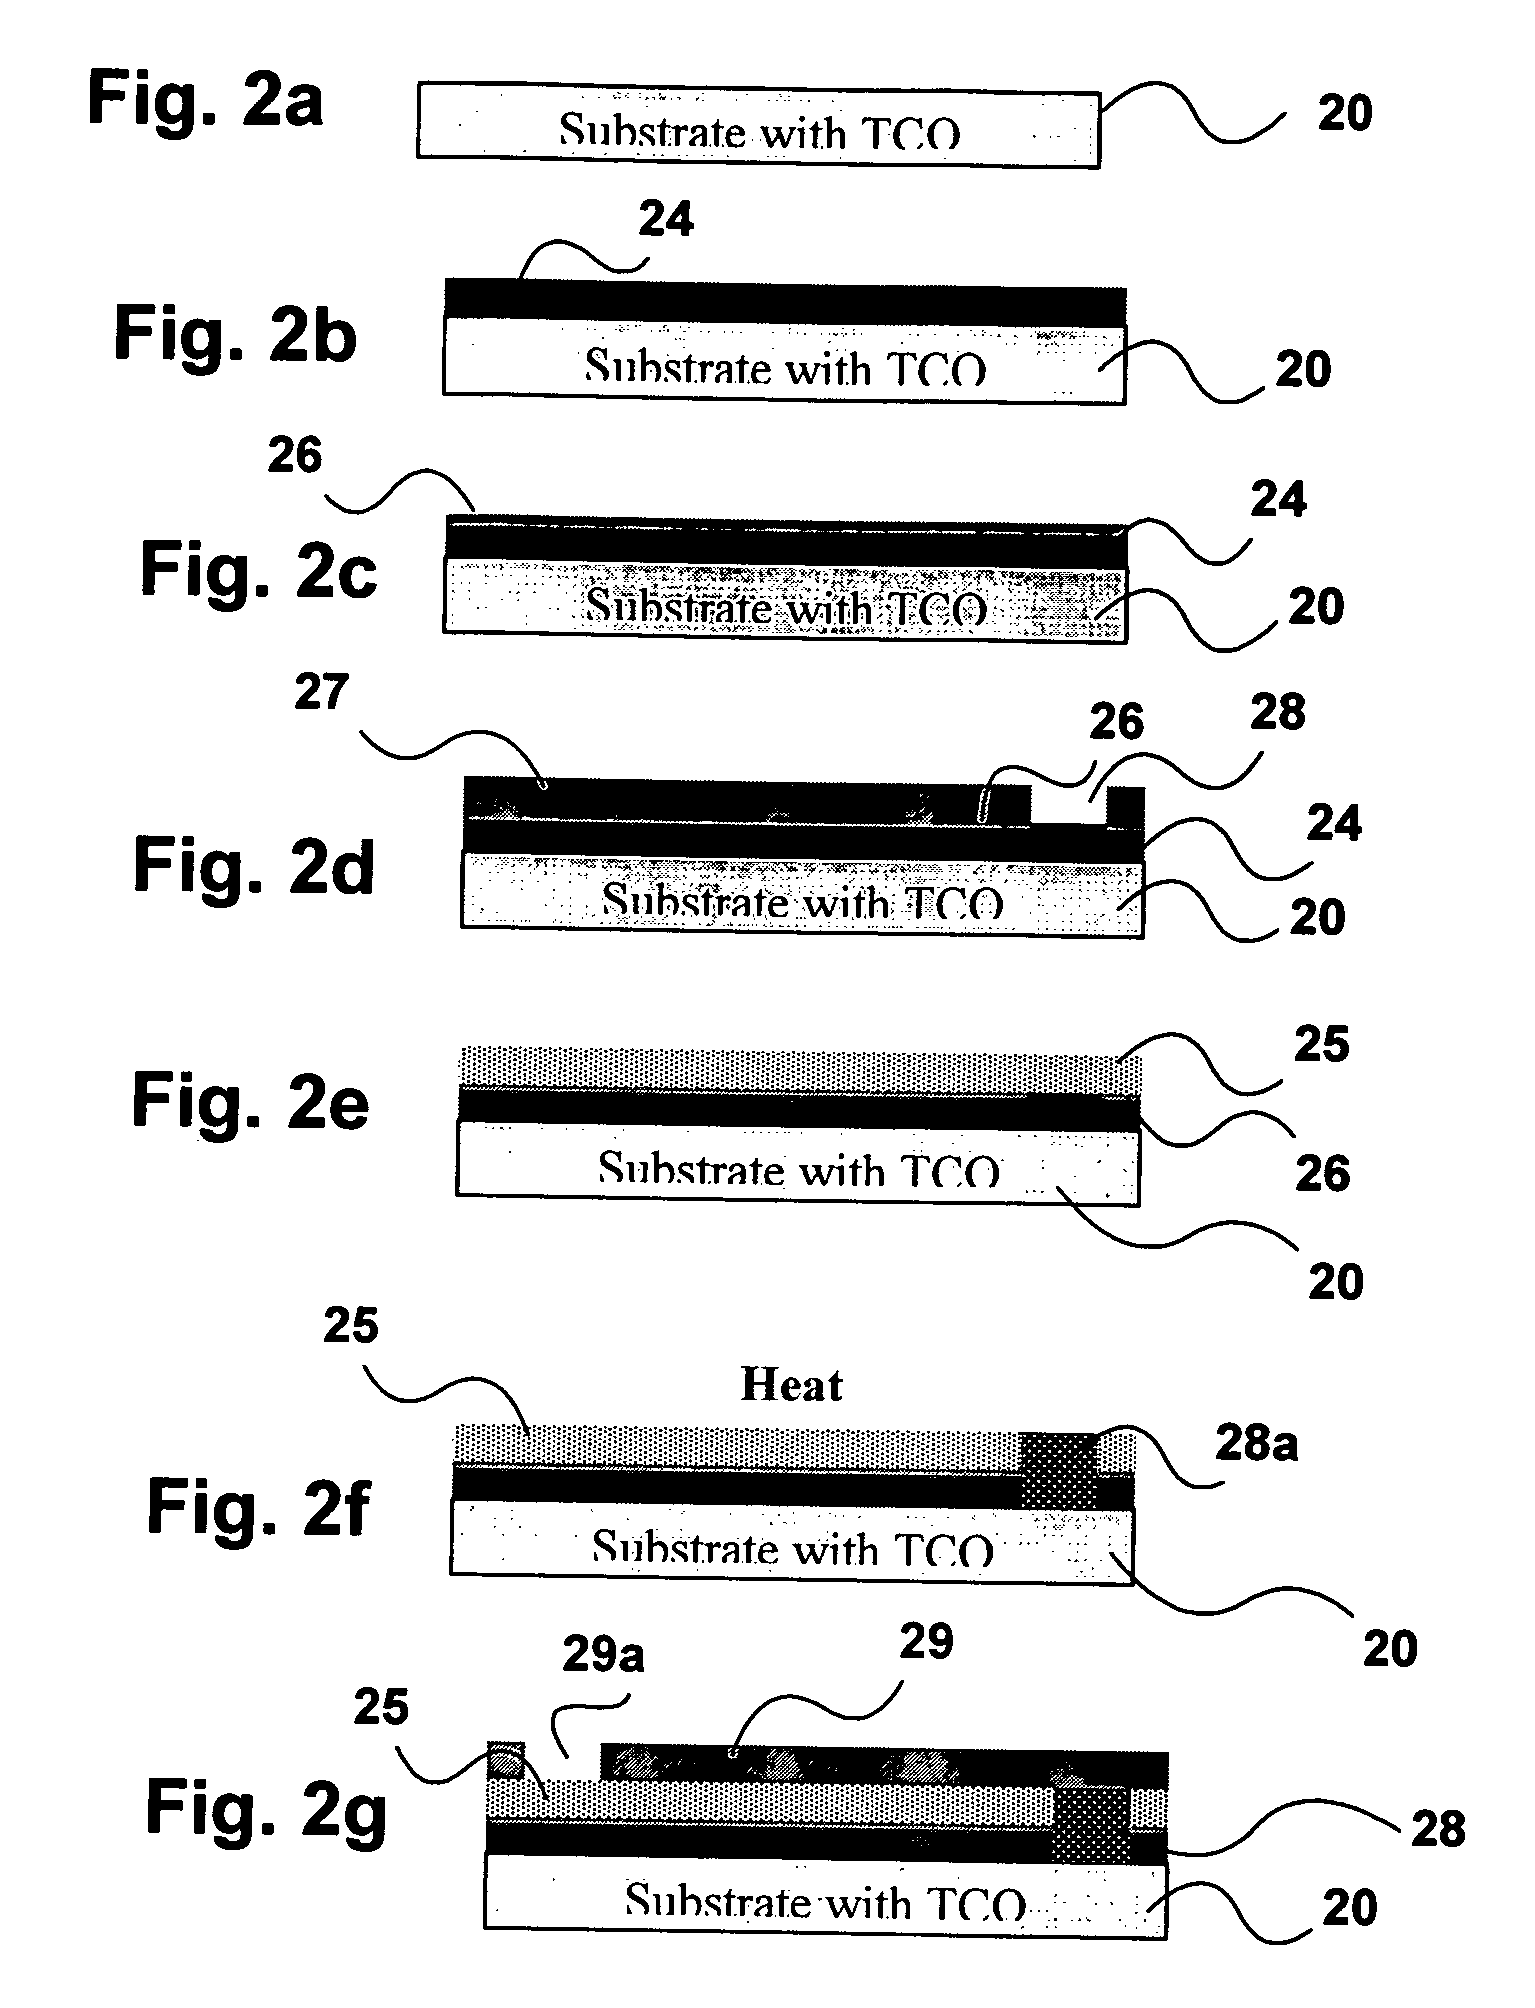 Microblinds and a method of fabrication thereof